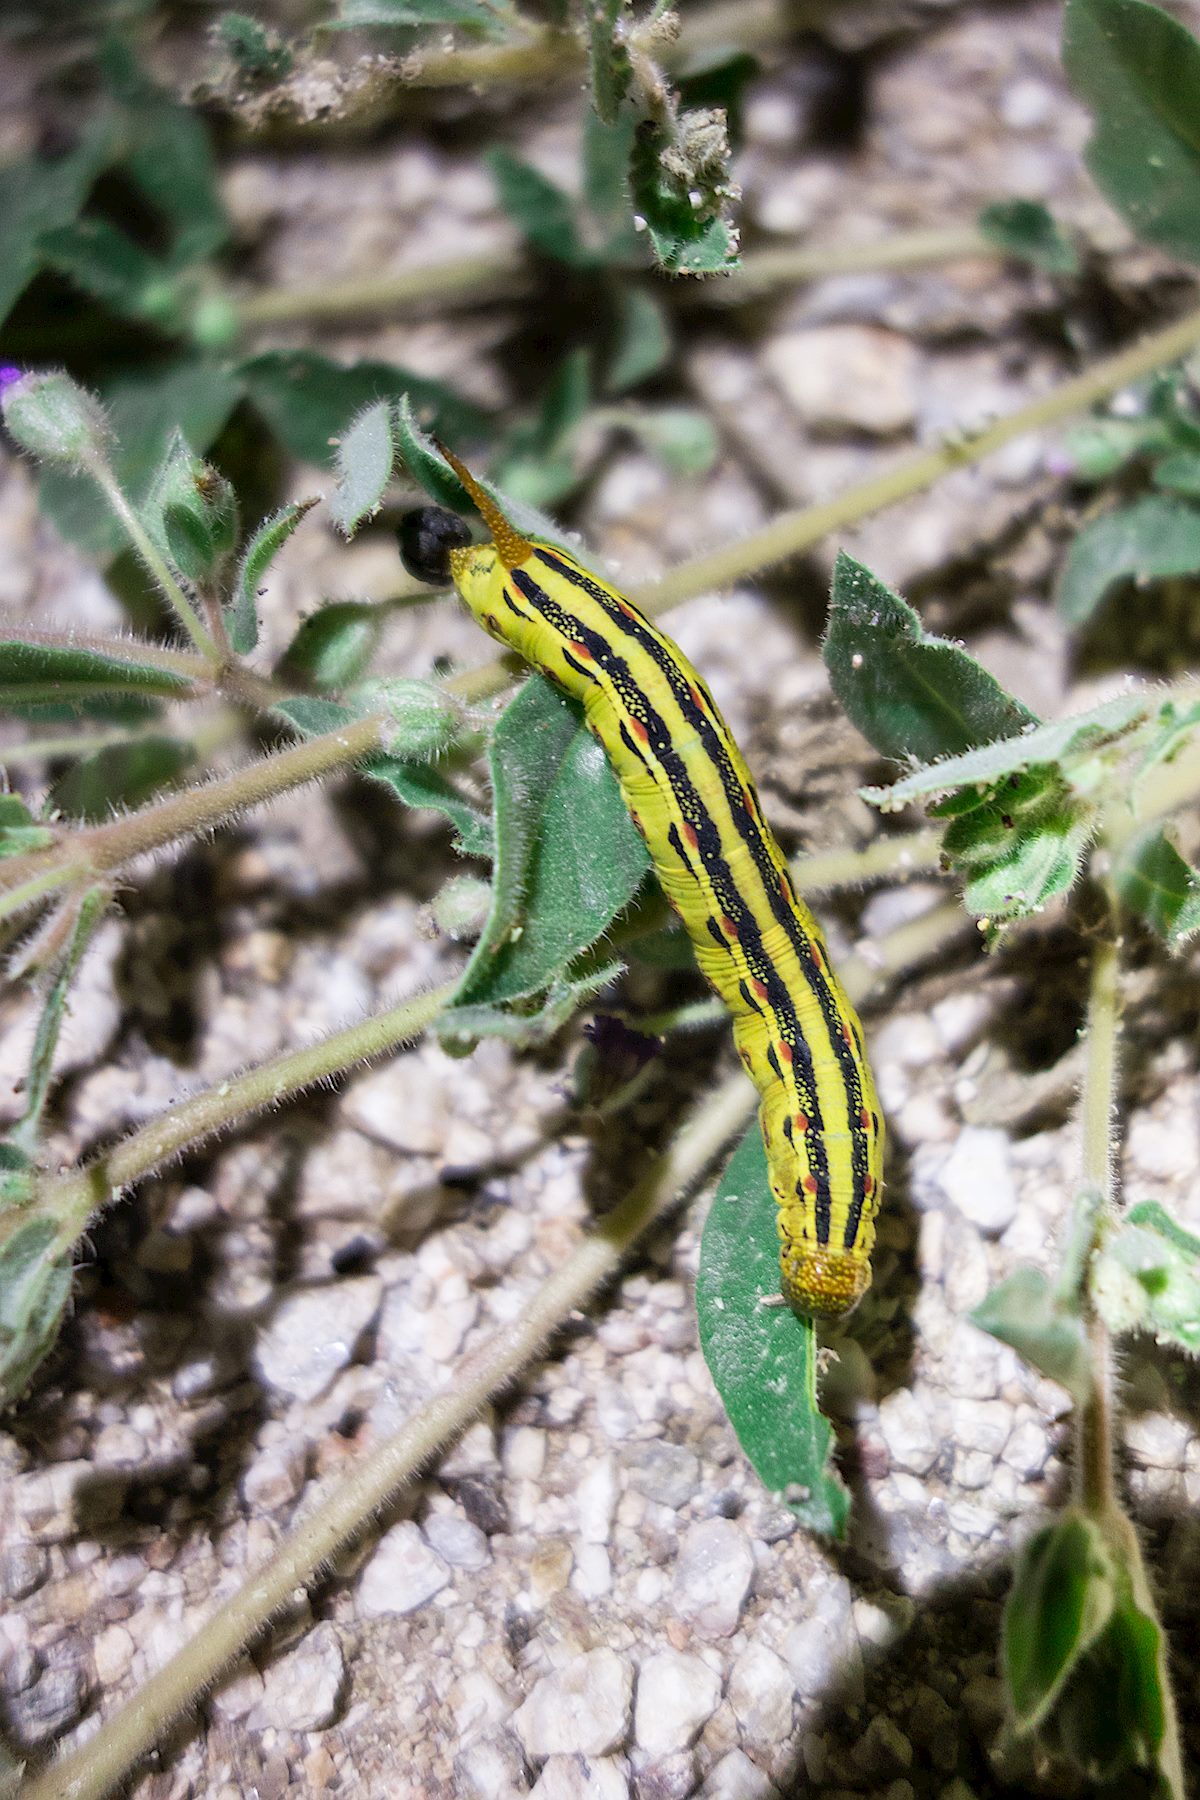 White-lined Sphinx Moth Catepillar - by headlamp on a cool summer evening. September 2014